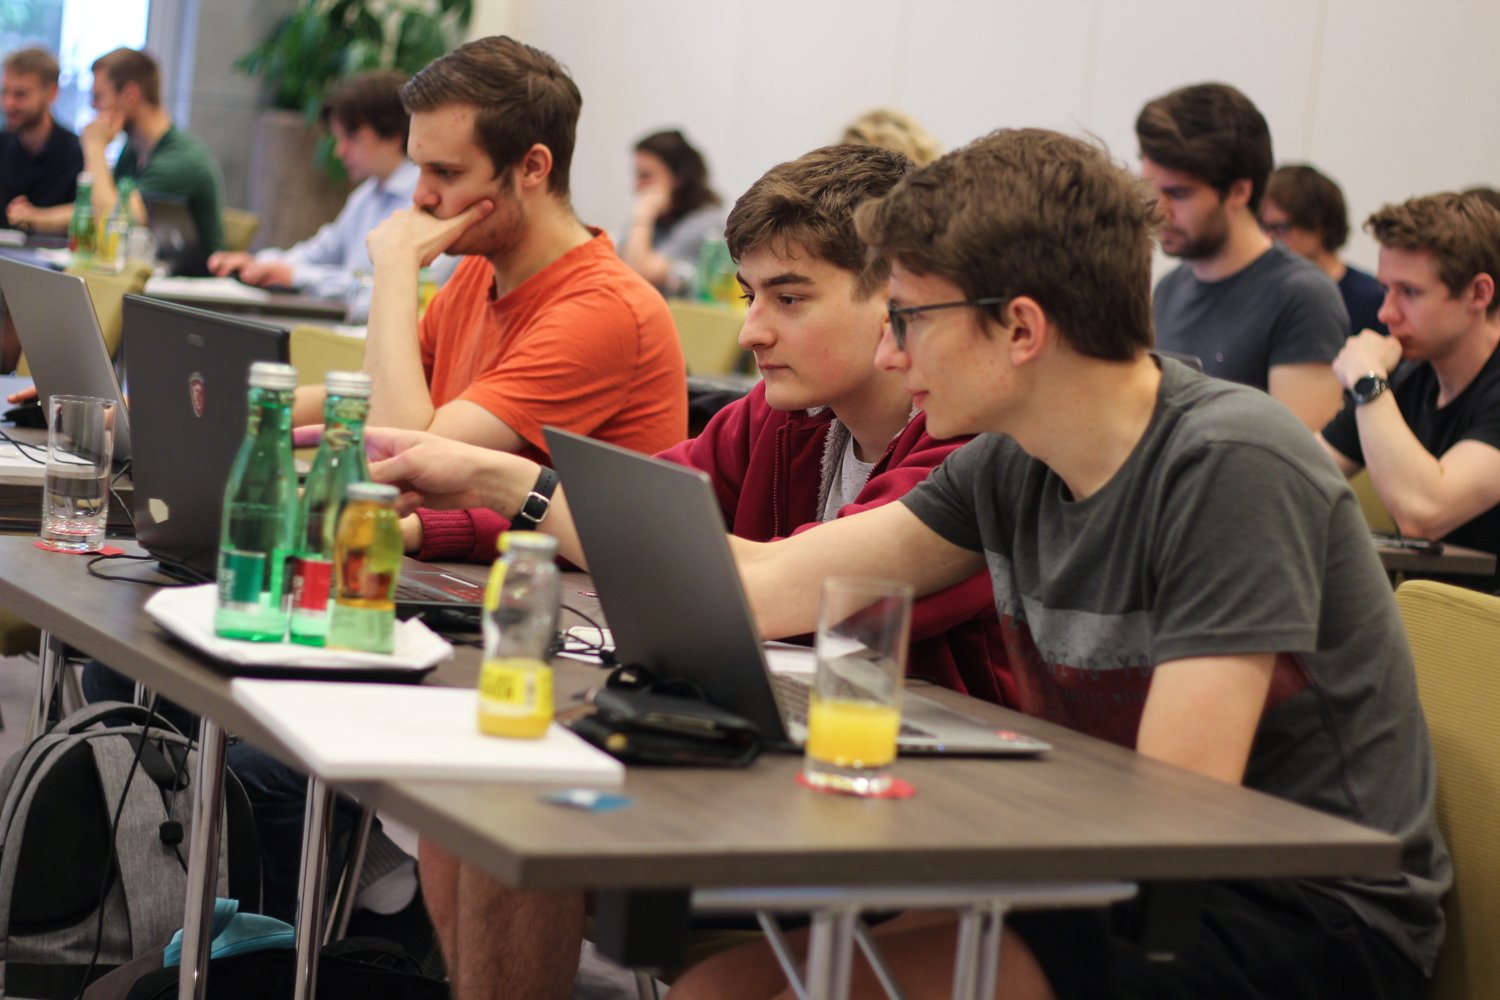 Hackathon attendees, mostly men, sitting at desks in a large room, looking concentrated at their laptop screens